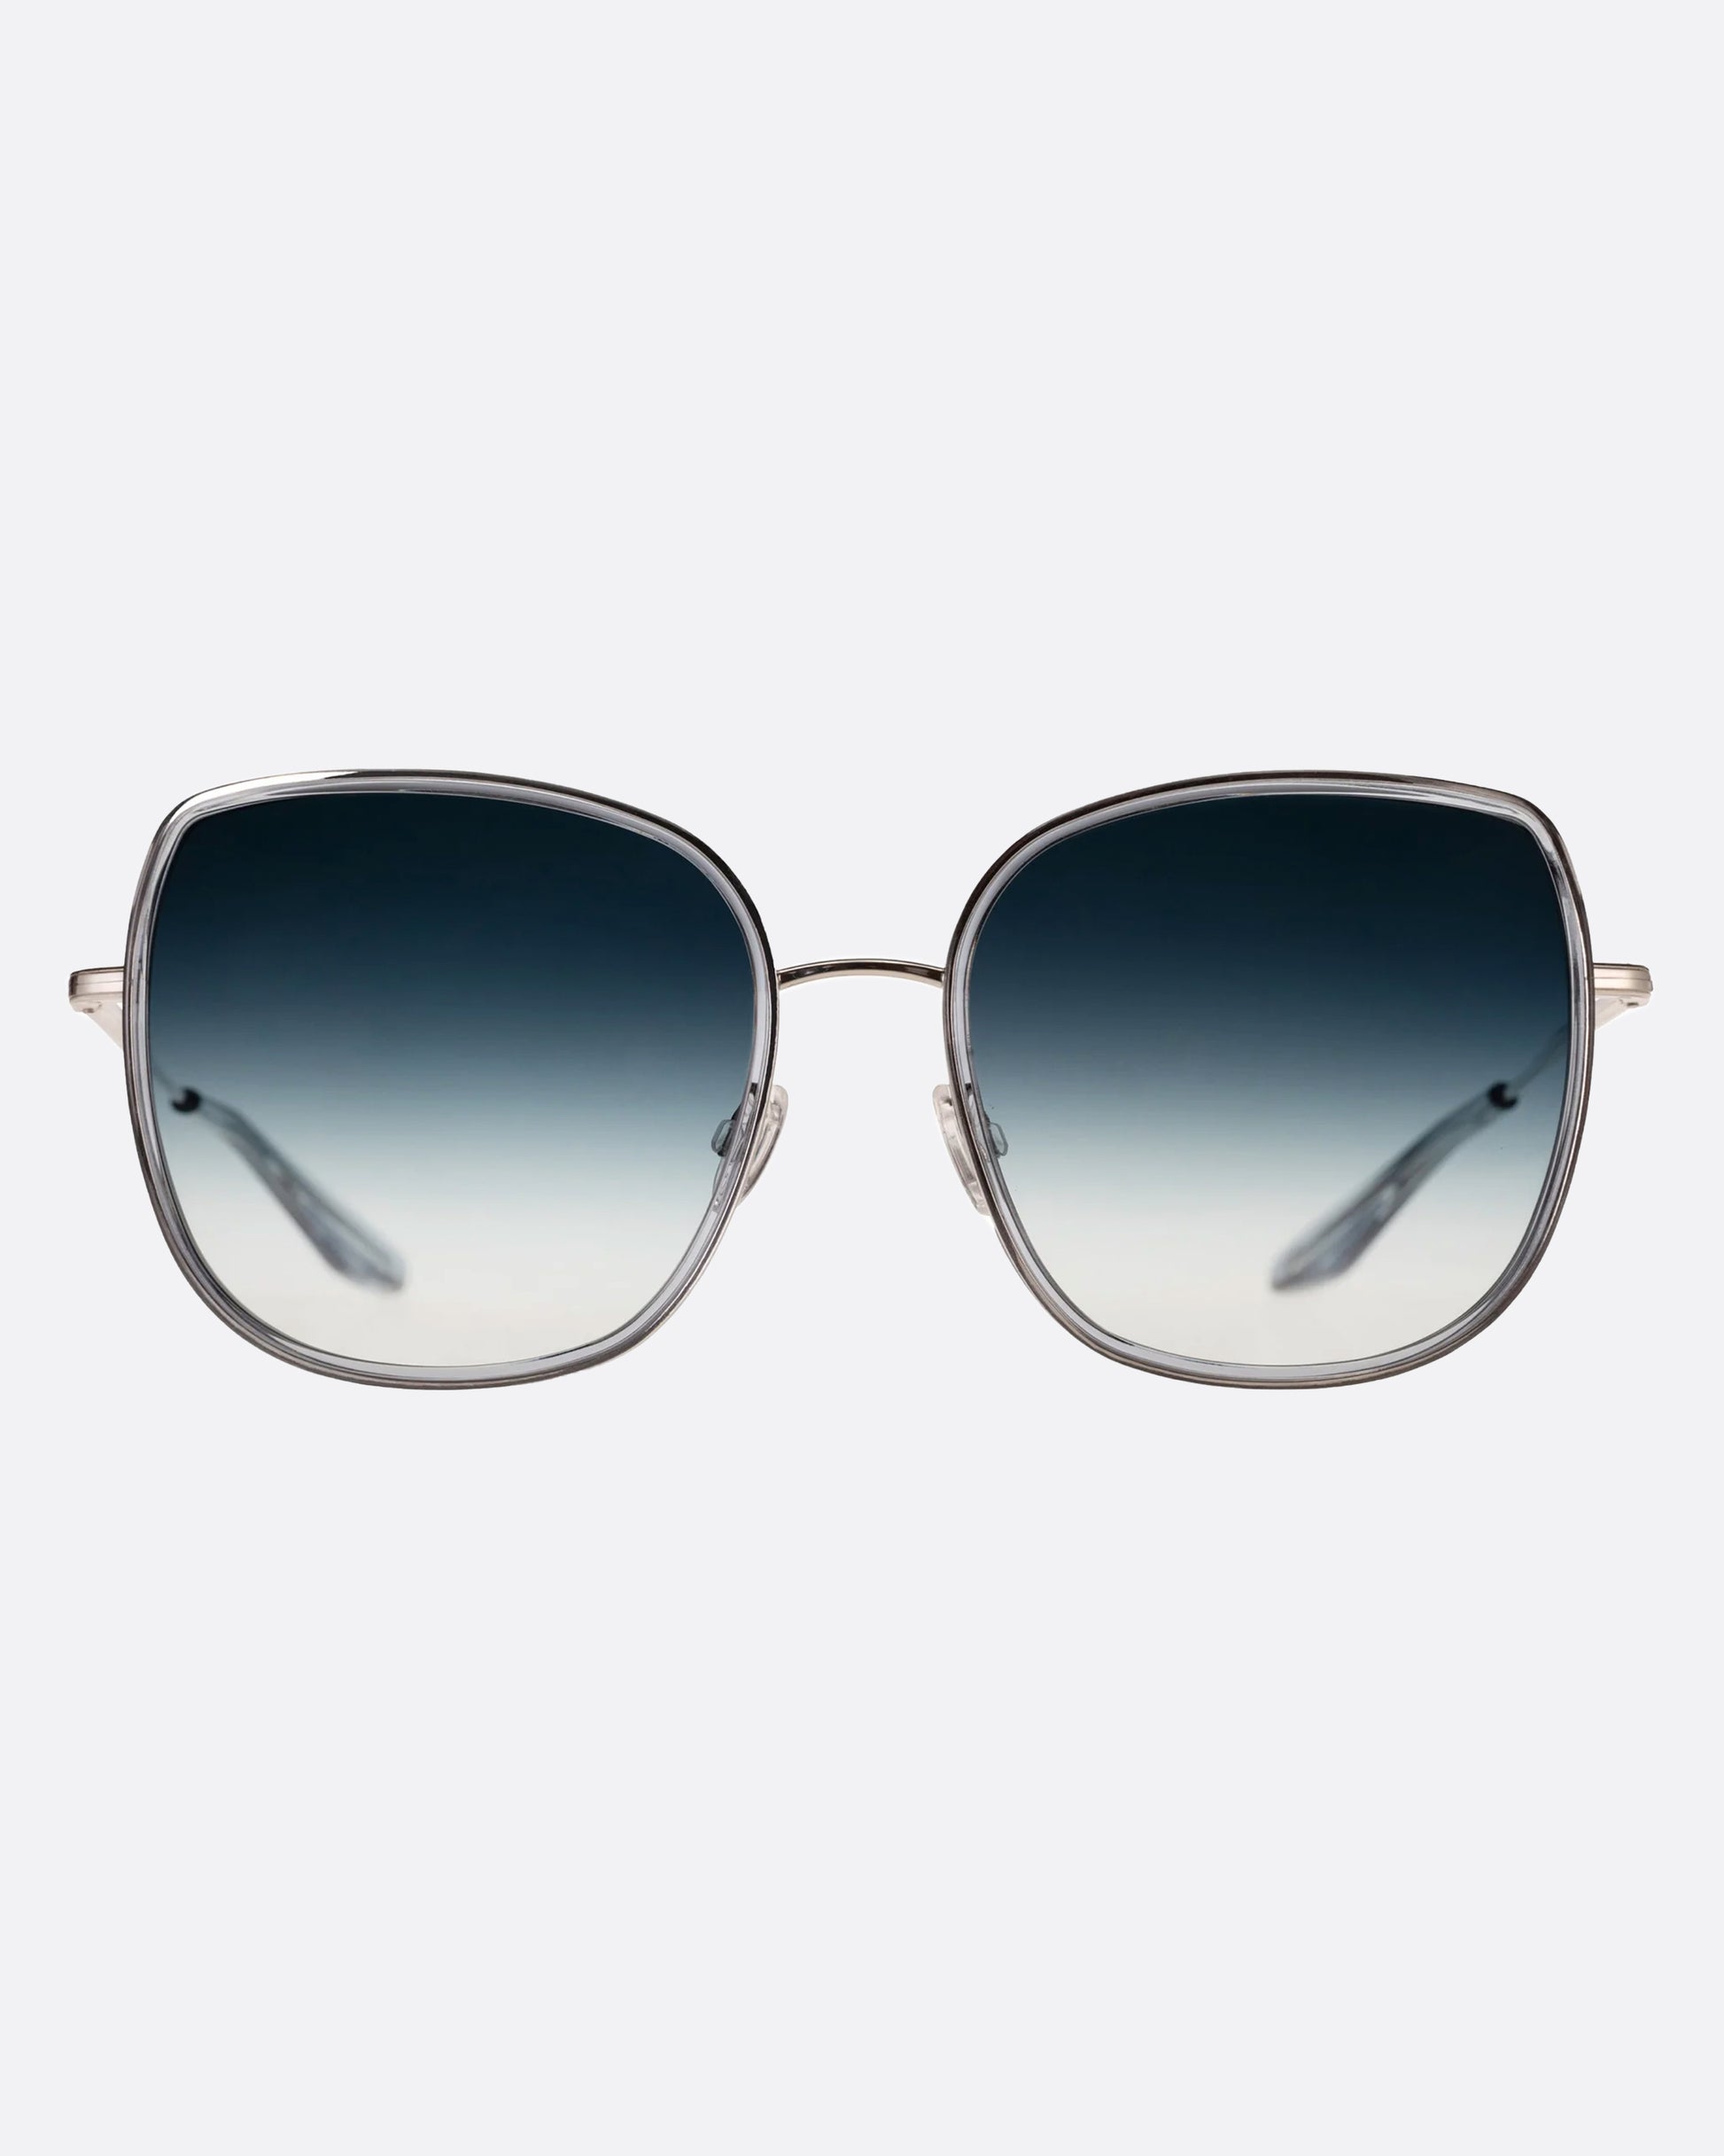 A pair of luxurious, but lightweight glamorous sunglasses crafted in titanium and Japanese acetate.